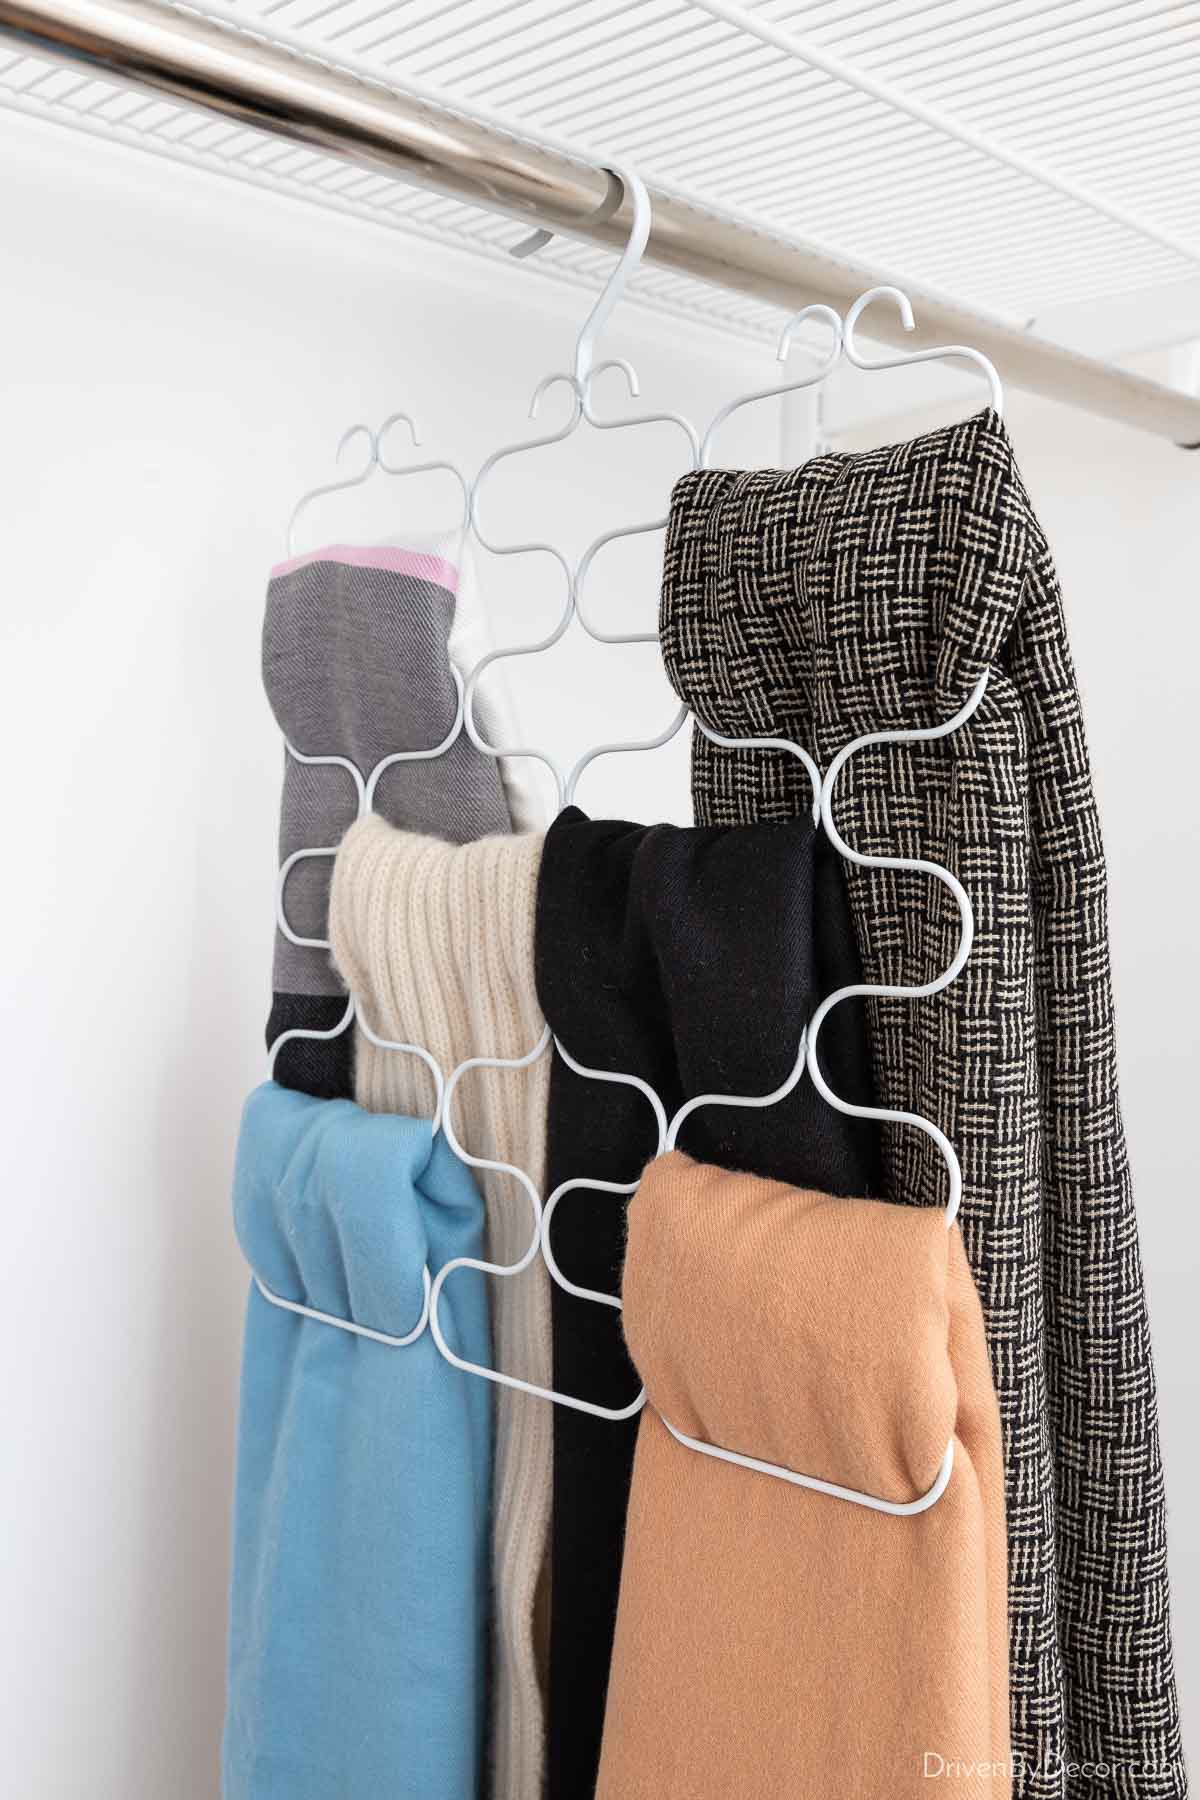 Closet organization of scarves using this multi-loop scarf holder with six scarves on it